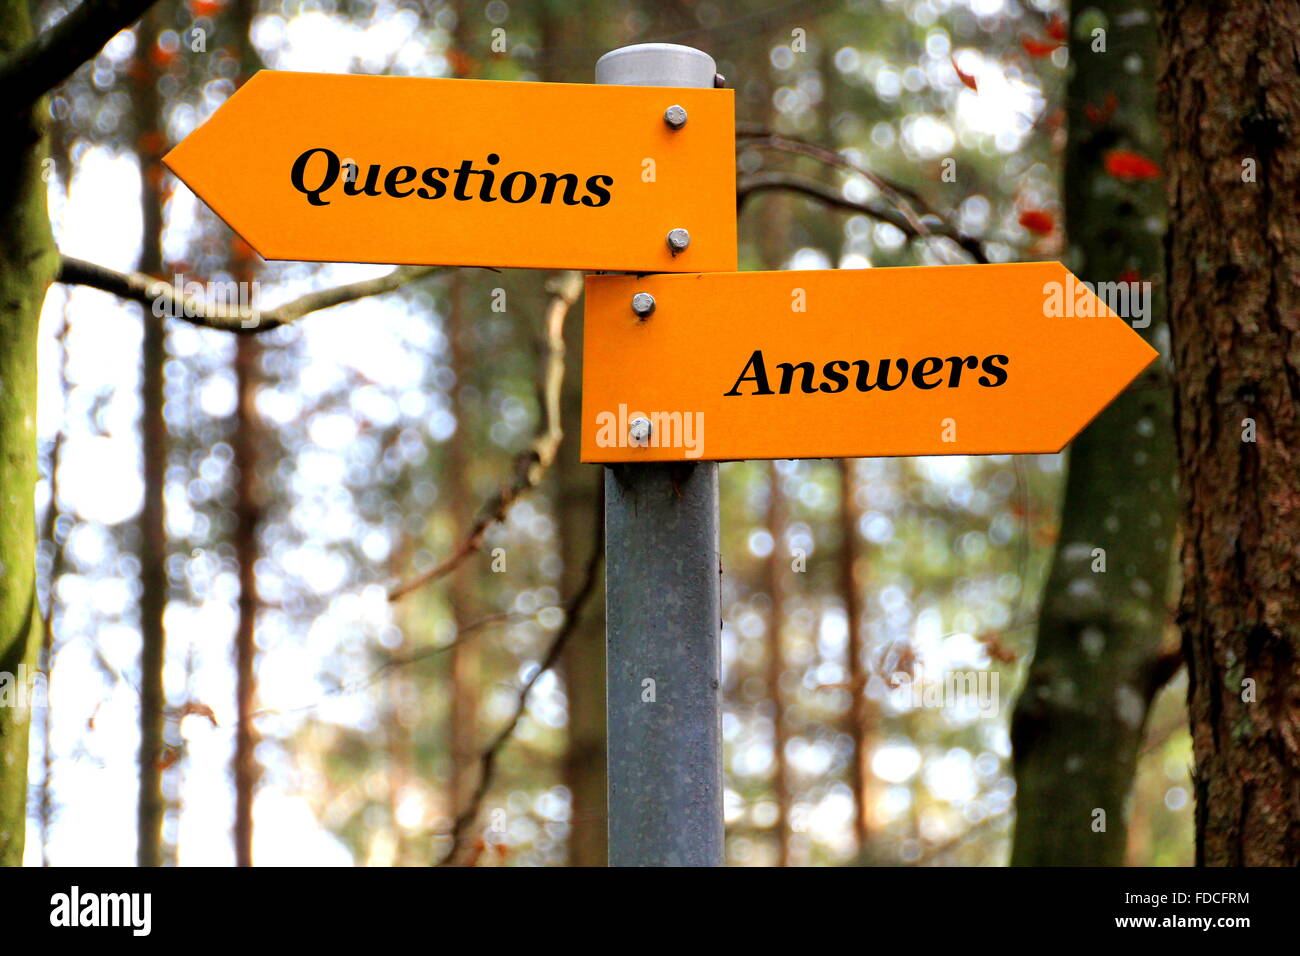 Questions and Answers written on a direction sign Stock Photo